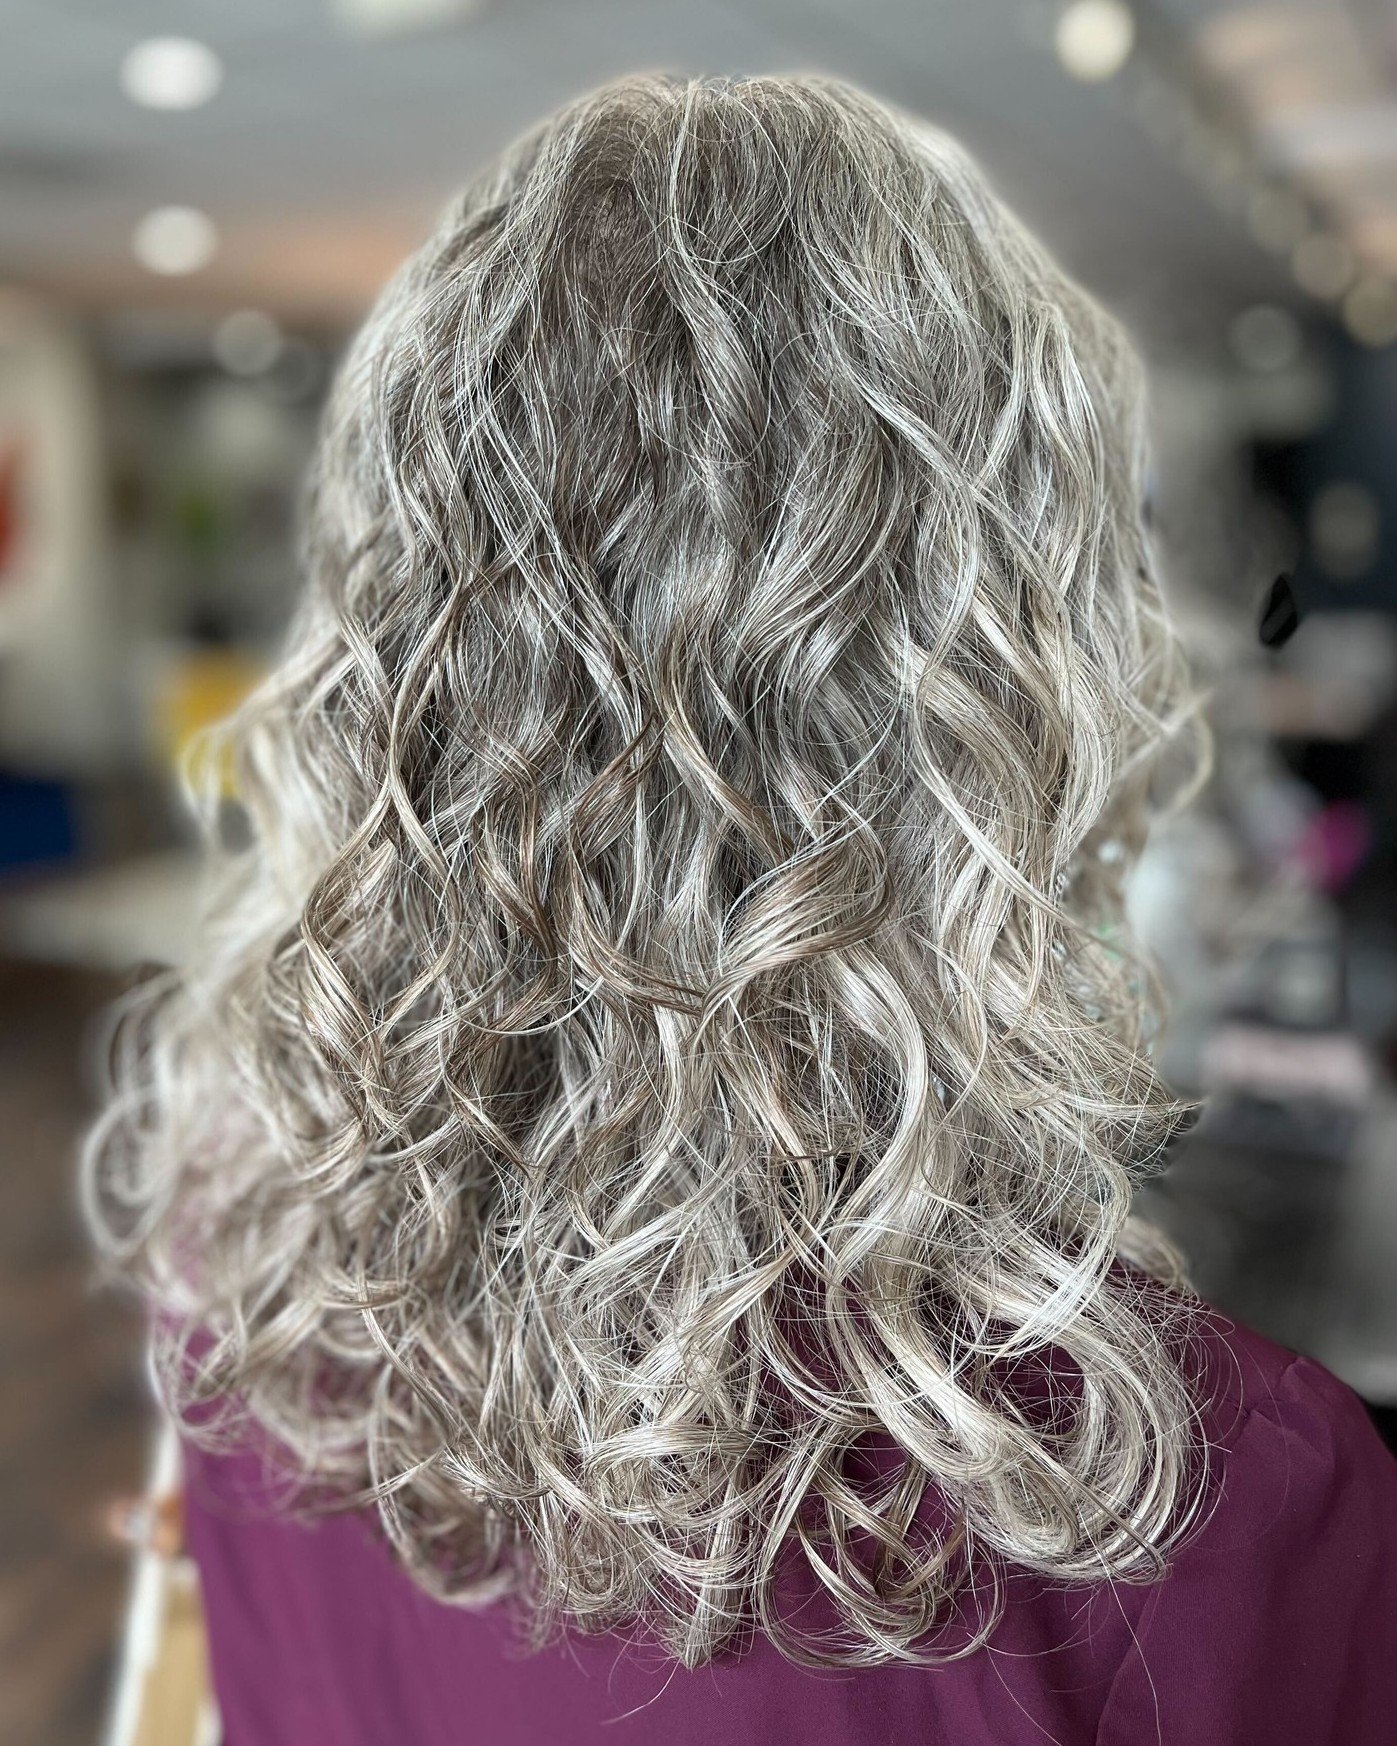 Curly Hair Perfection by Lindsay 💜 @hairbylindsay_ 

 #davinessalon #discoverwakeforest #curlyhair #nccurlspecialist #wakeforestcurlspecialist #haircutspecialist #haircuttingspecialist #ncstylist #hairundone #wakeforest #hairundonesalon #919salon #w